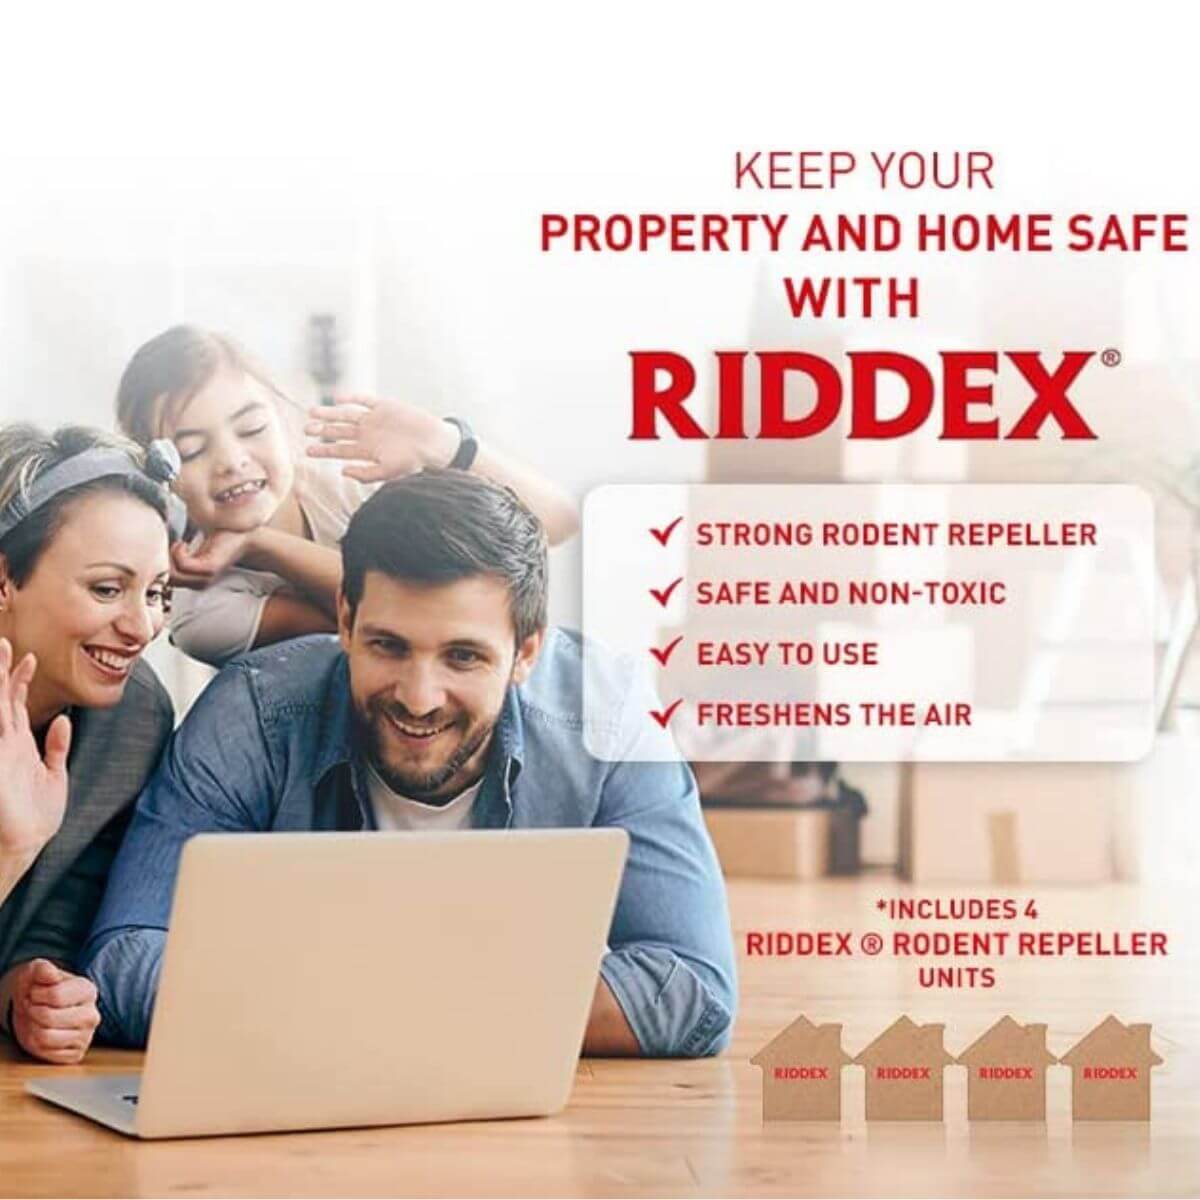 Keep your property and home safe with Riddex